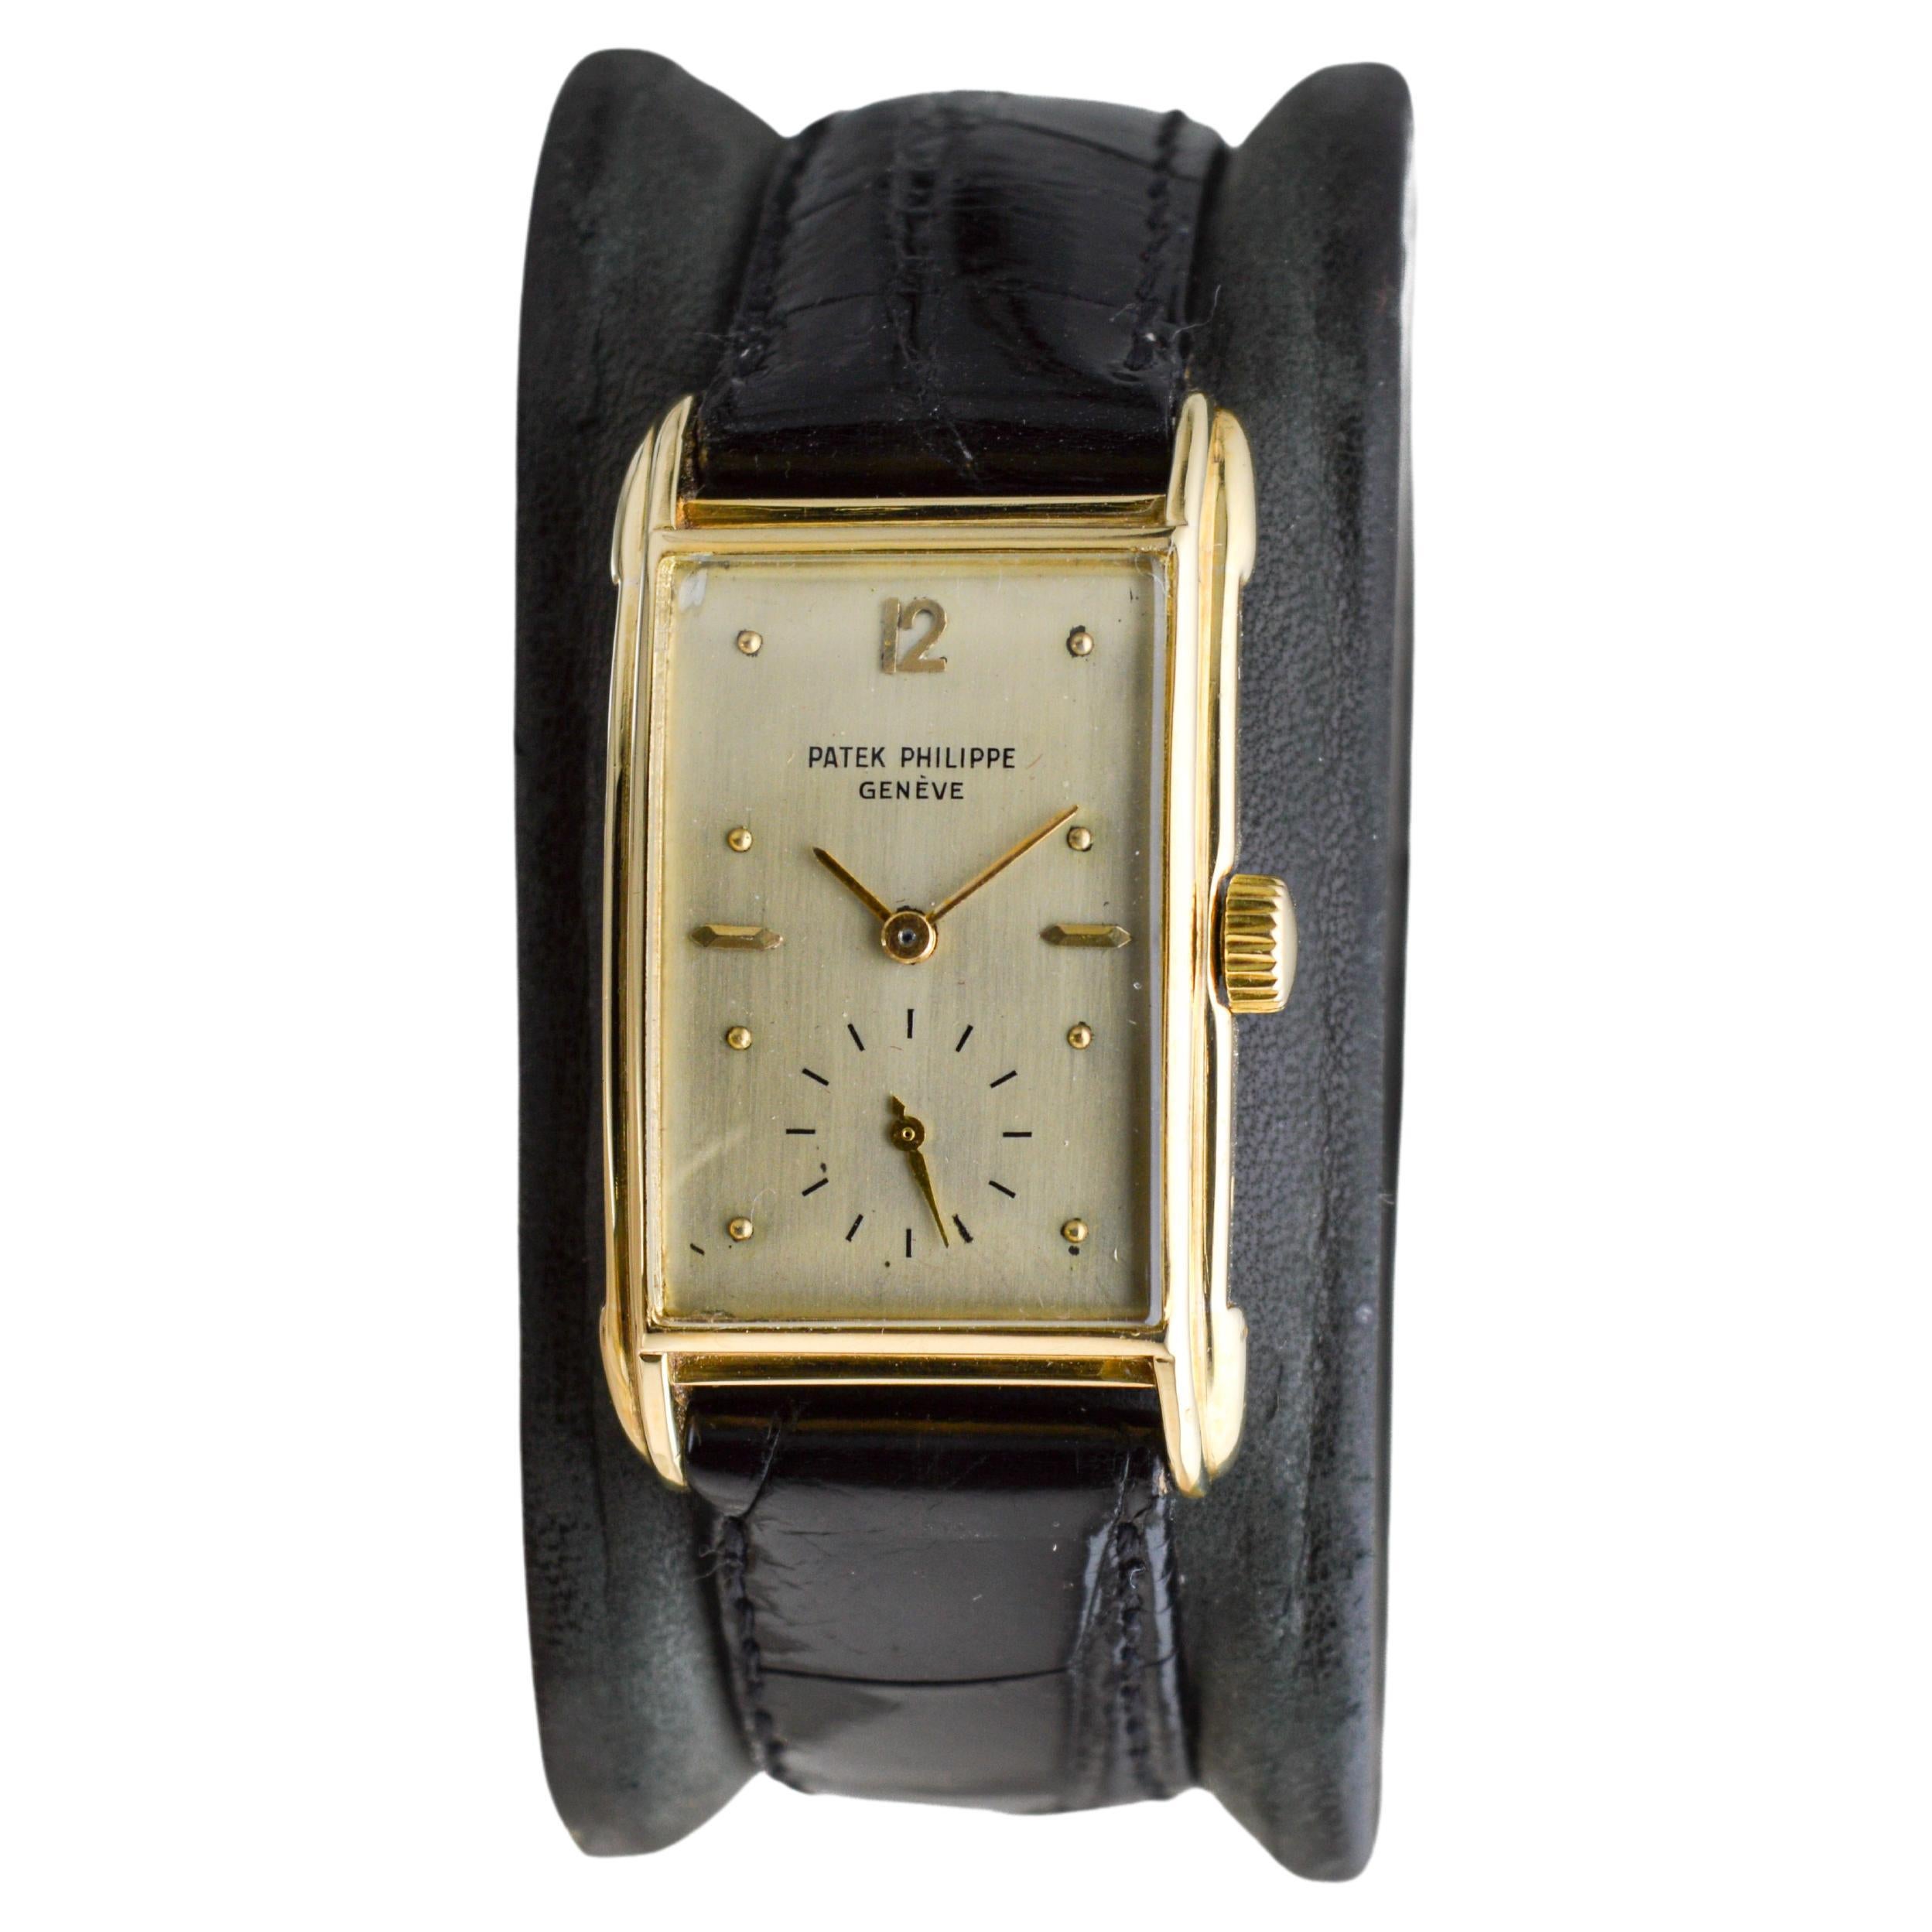 Patek Philippe Yellow Gold Art Deco Style Manual Watch, circa 1948 with Archival